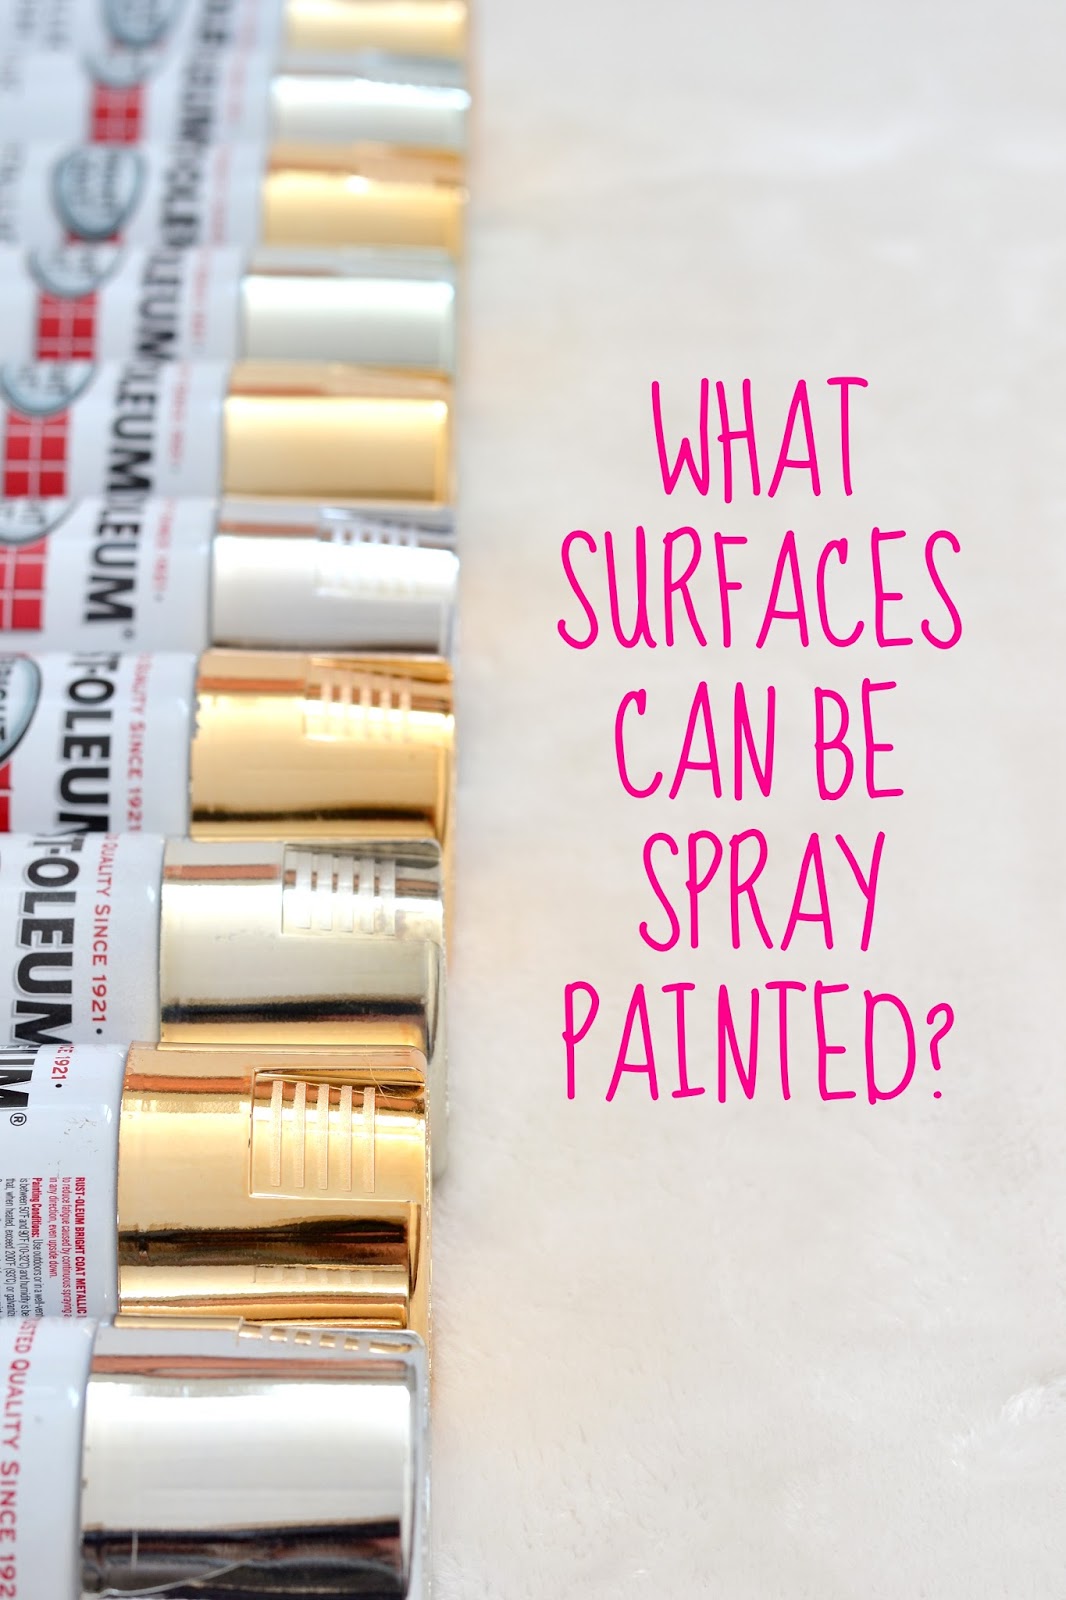 LiveLoveDIY: 10 Things You Should Know About Spray Paint